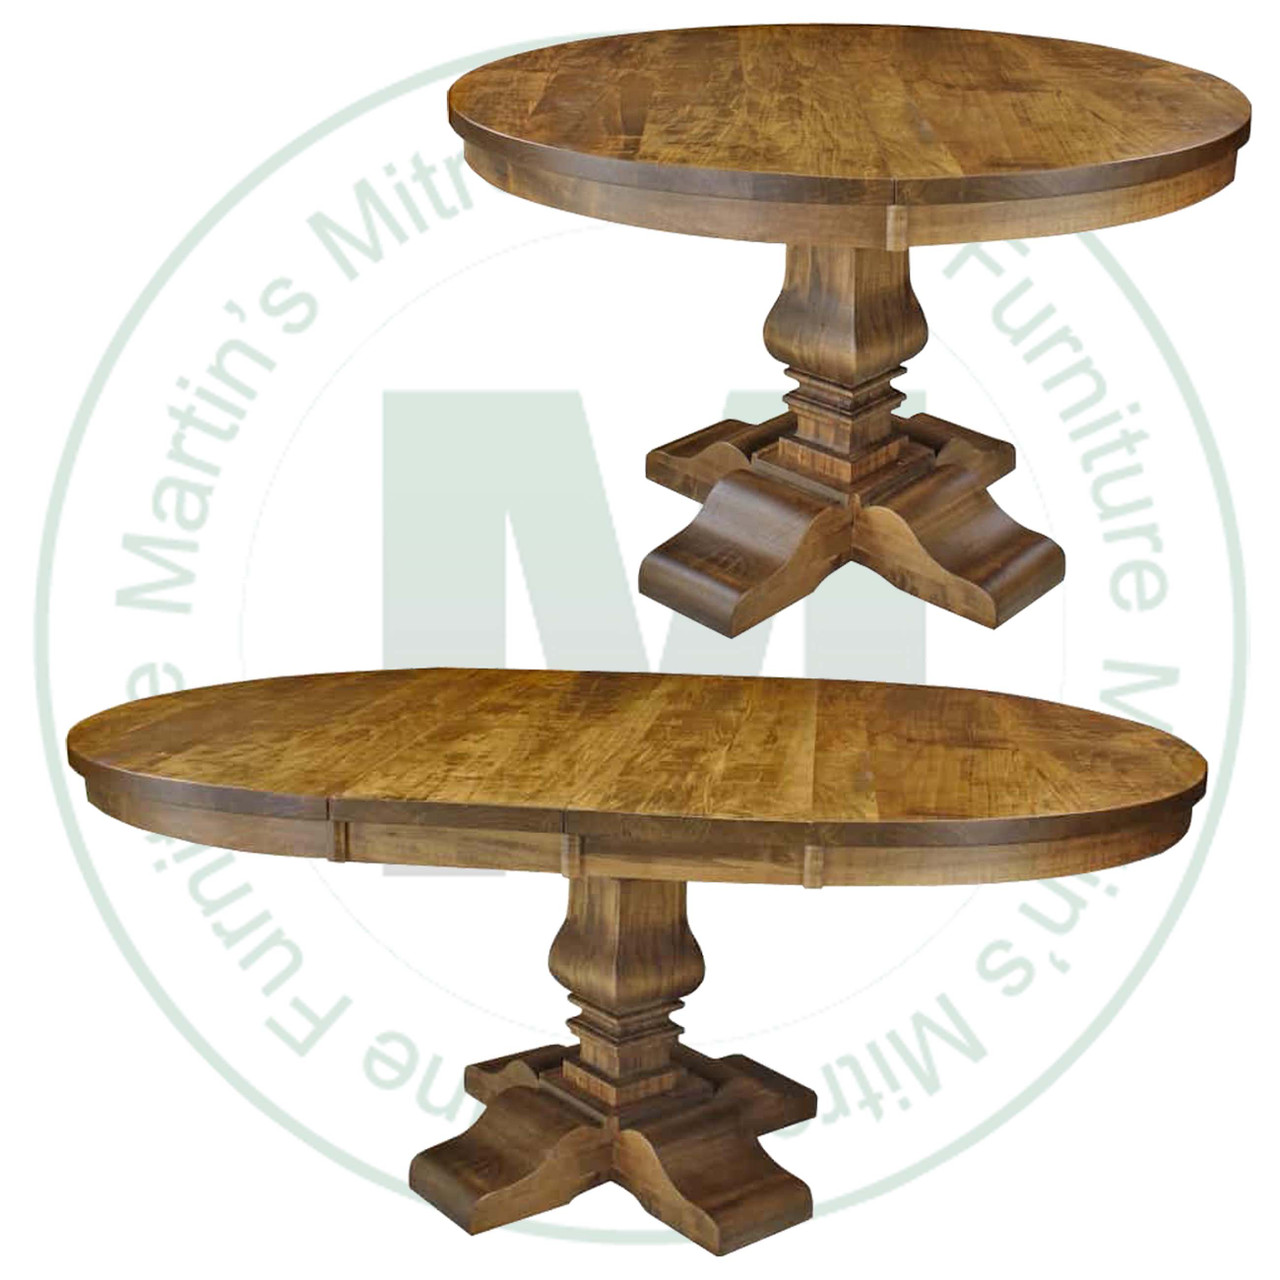 Maple Century Single Pedestal Round Solid Top Table 42'' Deep x 42'' Wide x 30'' High With 2 - 12'' Centre Leaves